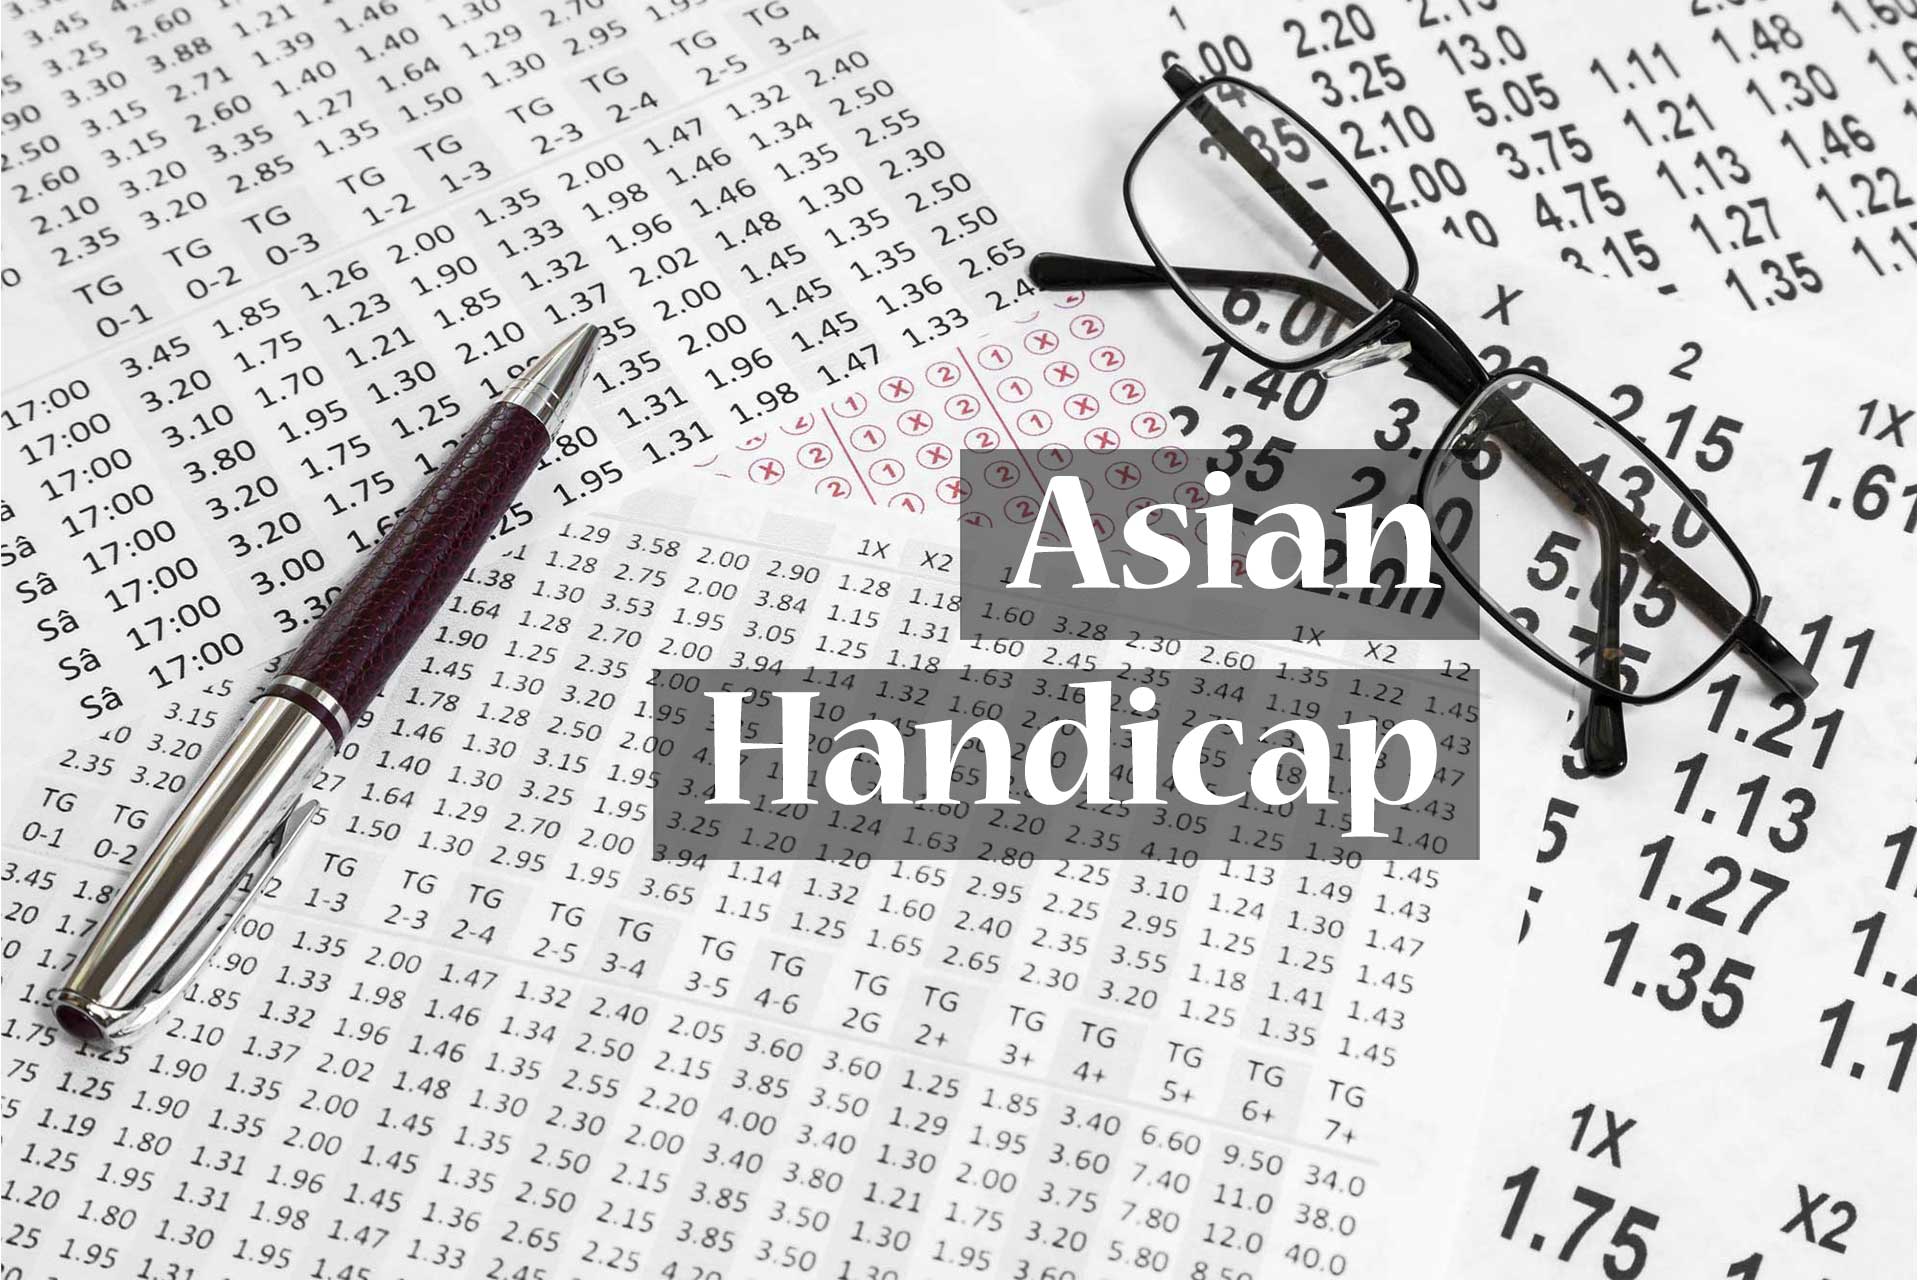 Strange Facts About asian bookies, asian bookmakers, online betting malaysia, asian betting sites, best asian bookmakers, asian sports bookmakers, sports betting malaysia, online sports betting malaysia, singapore online sportsbook